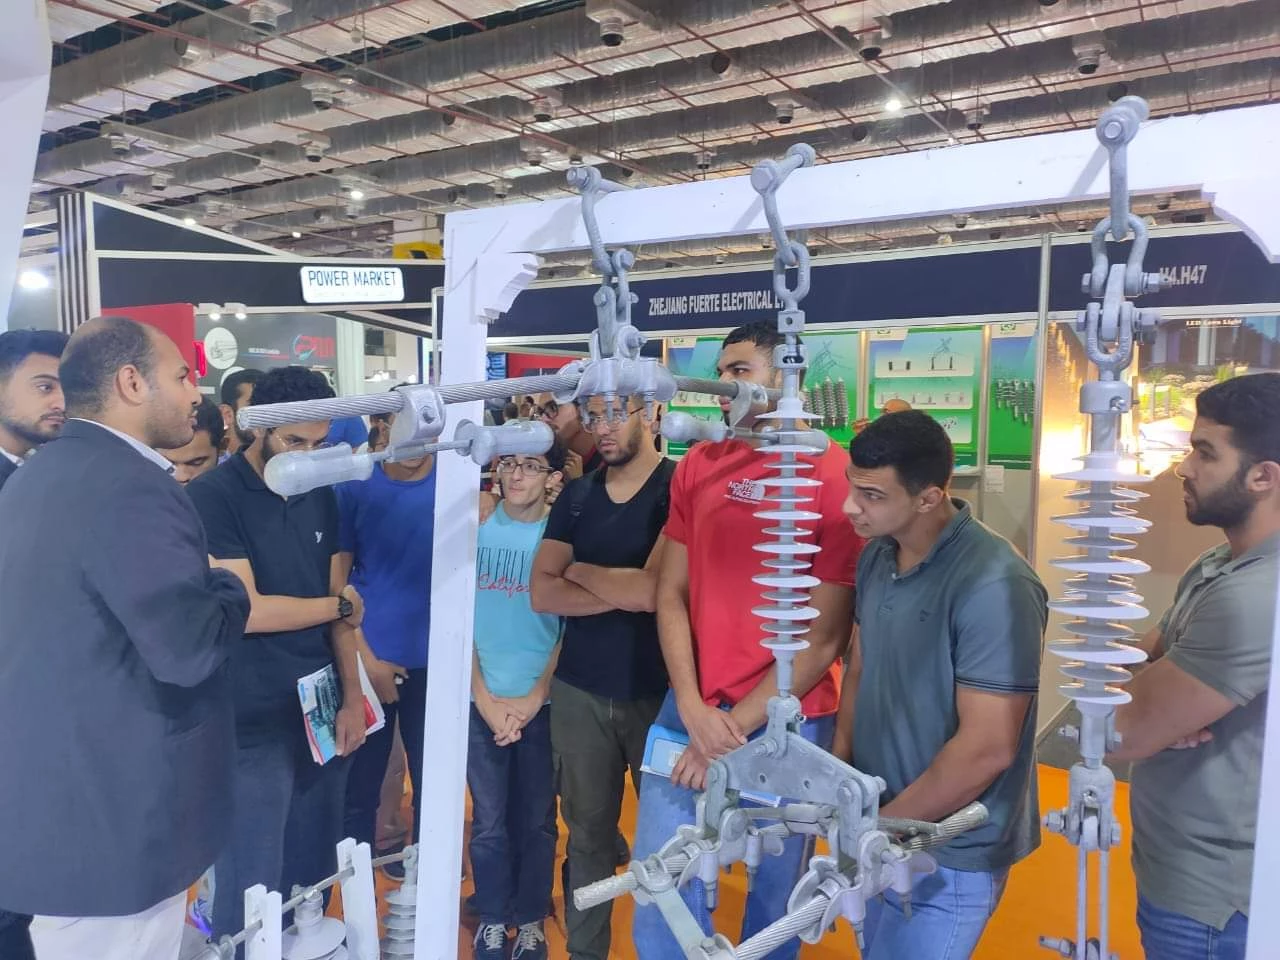 The Department of Cultural and Social Activity in Abu Qir organized a scientific trip for students, in cooperation with the Department of Electricity and Control, to the ENERGY EGYPT exhibition at the fairgrounds on 10/31/2023.6